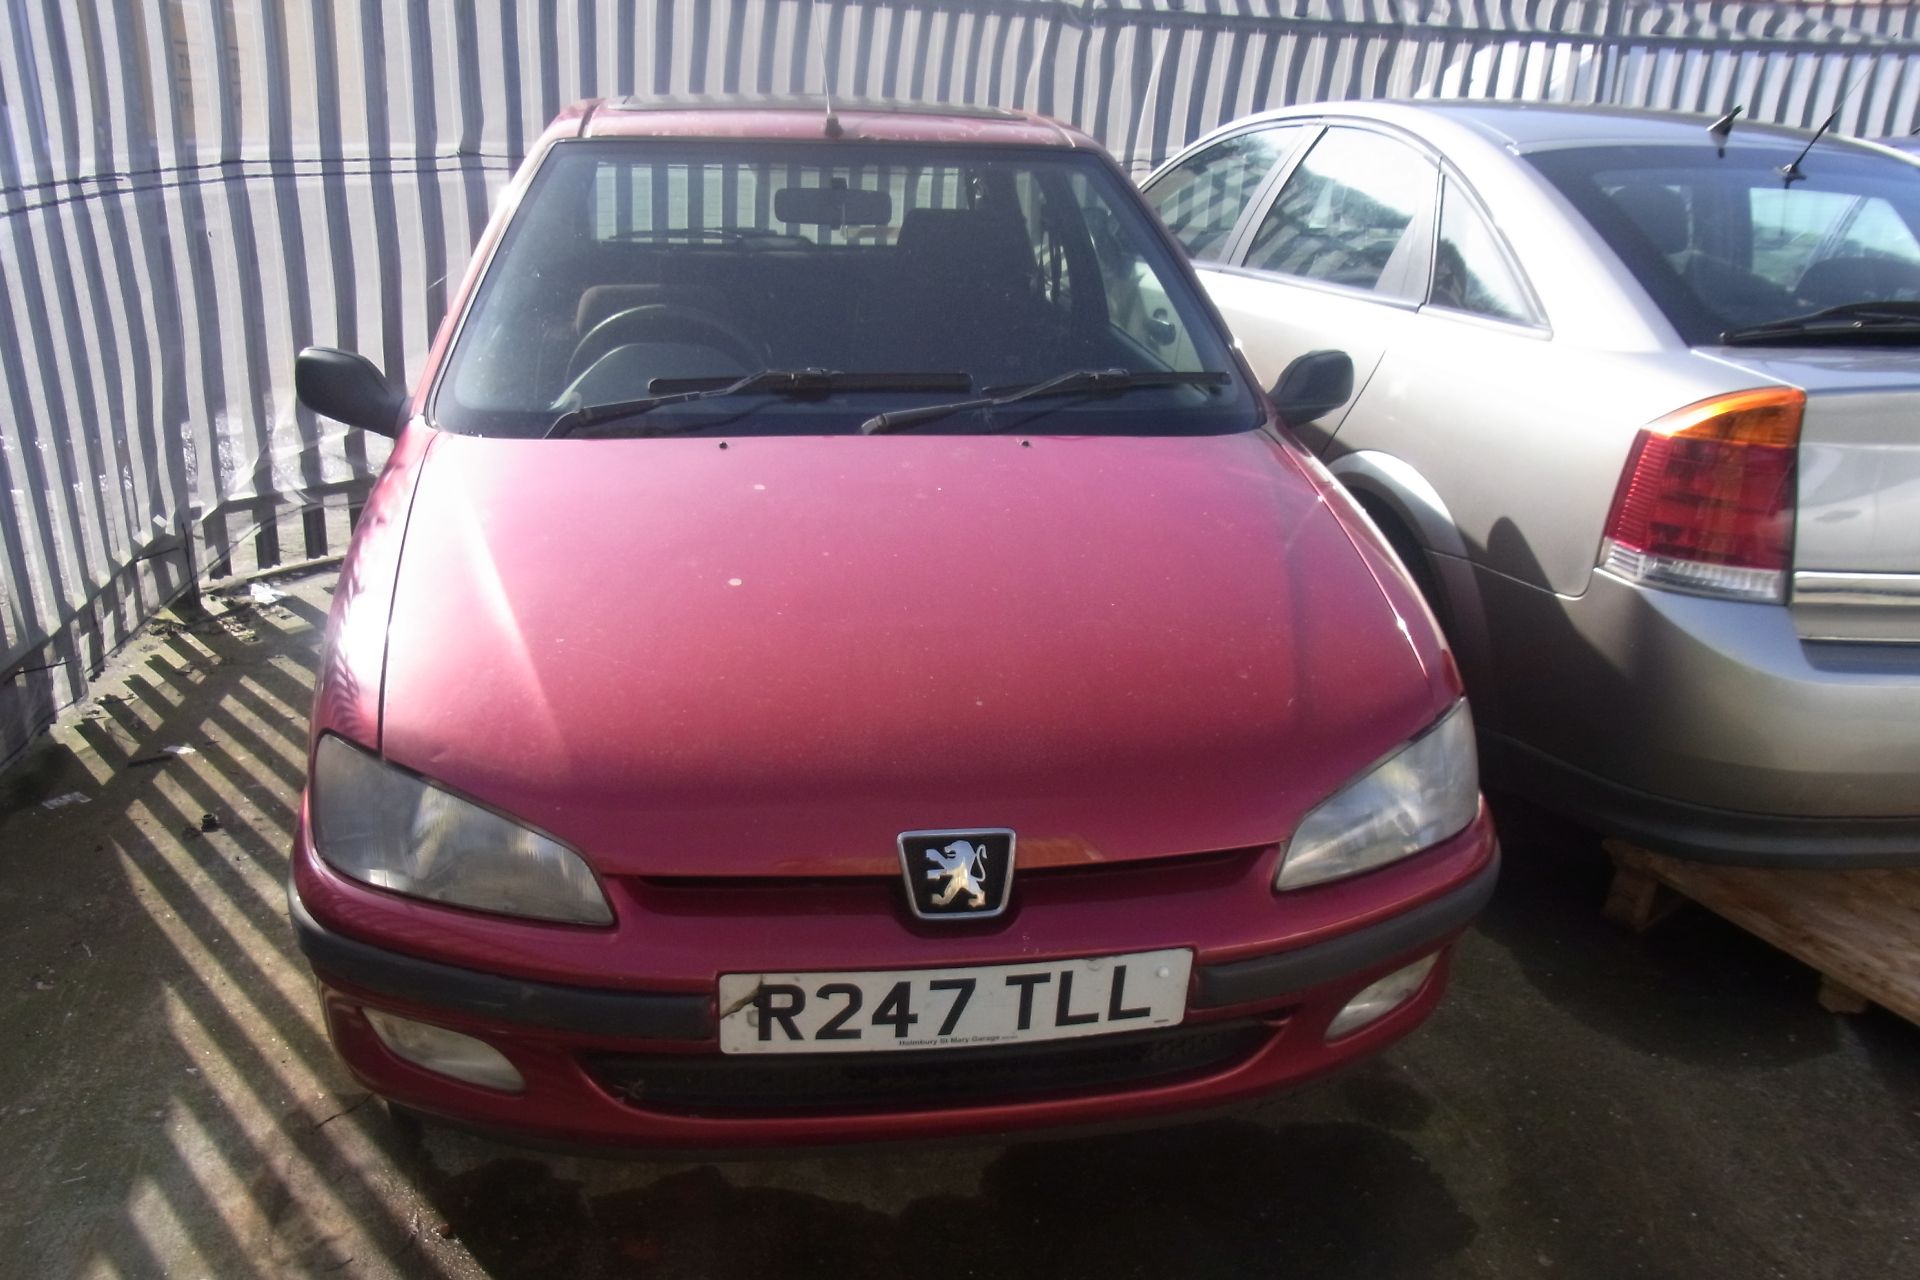 R247 TLL - Peugeot 106 XL Independence